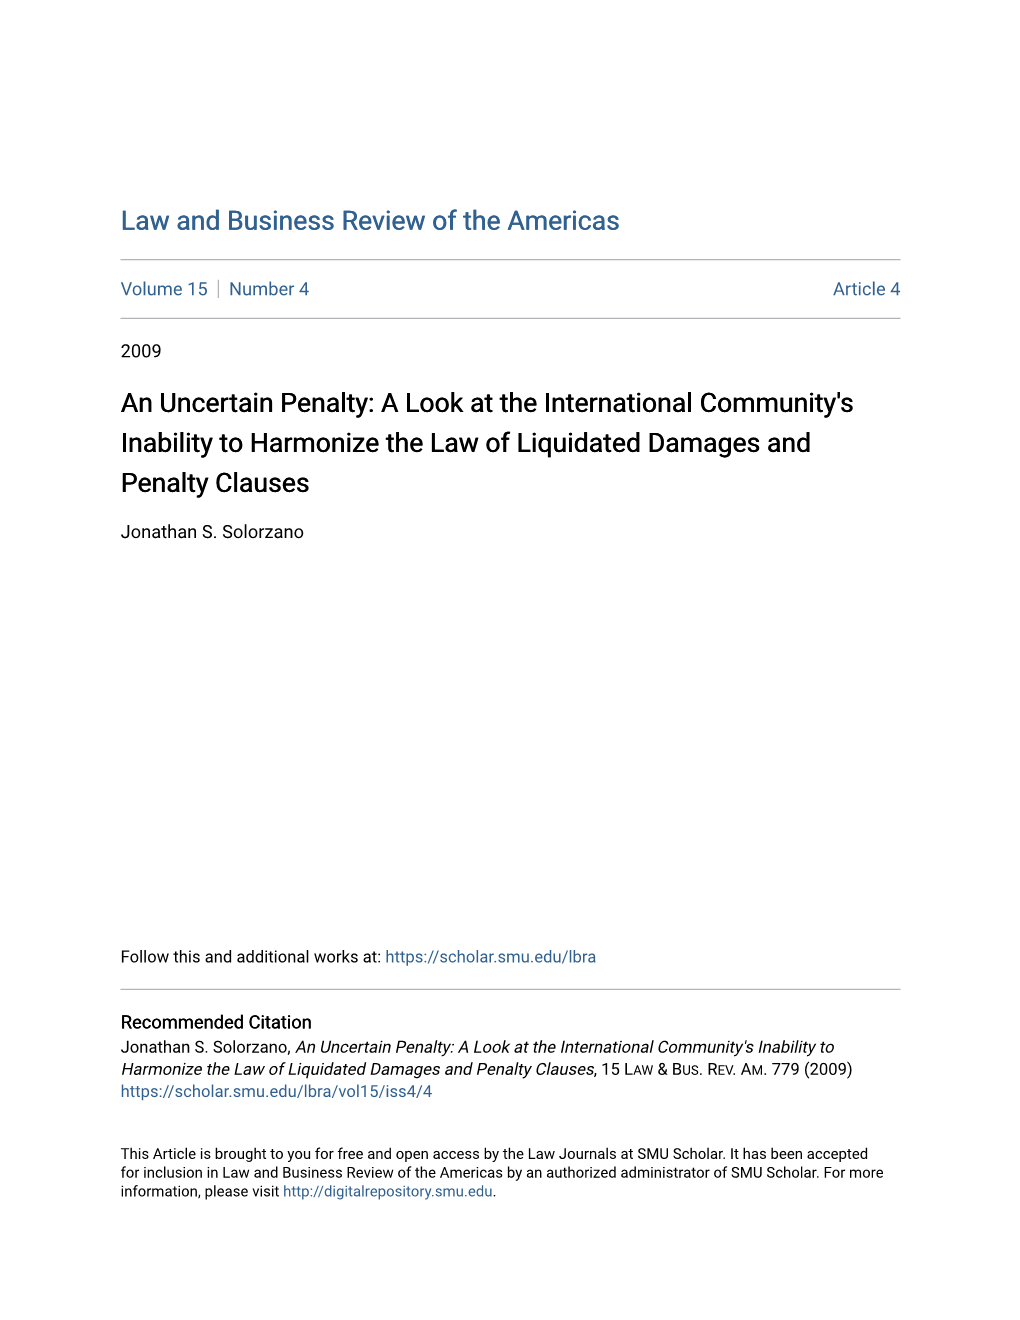 An Uncertain Penalty: a Look at the International Community's Inability to Harmonize the Law of Liquidated Damages and Penalty Clauses